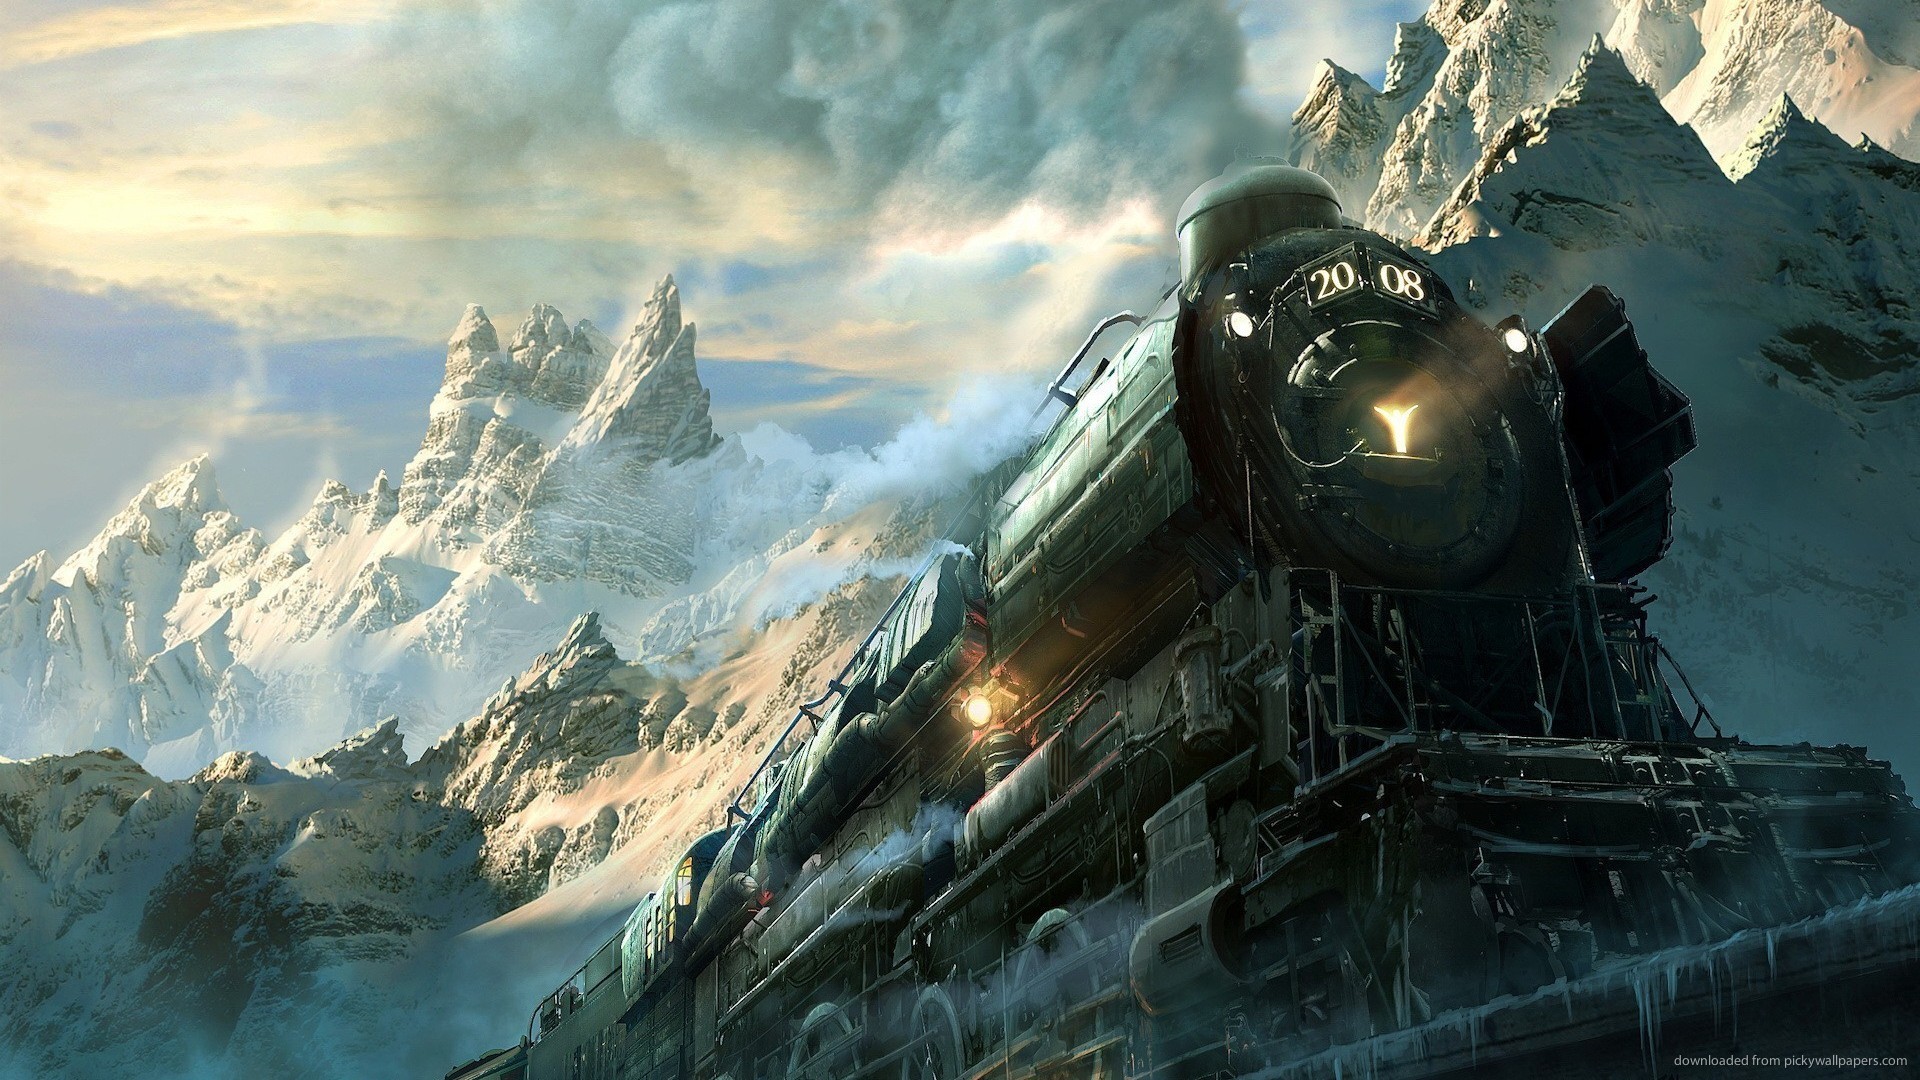 1920x1080 Blackberry, iPad, Epic Train Art Screensaver For Kindle3 And DX .